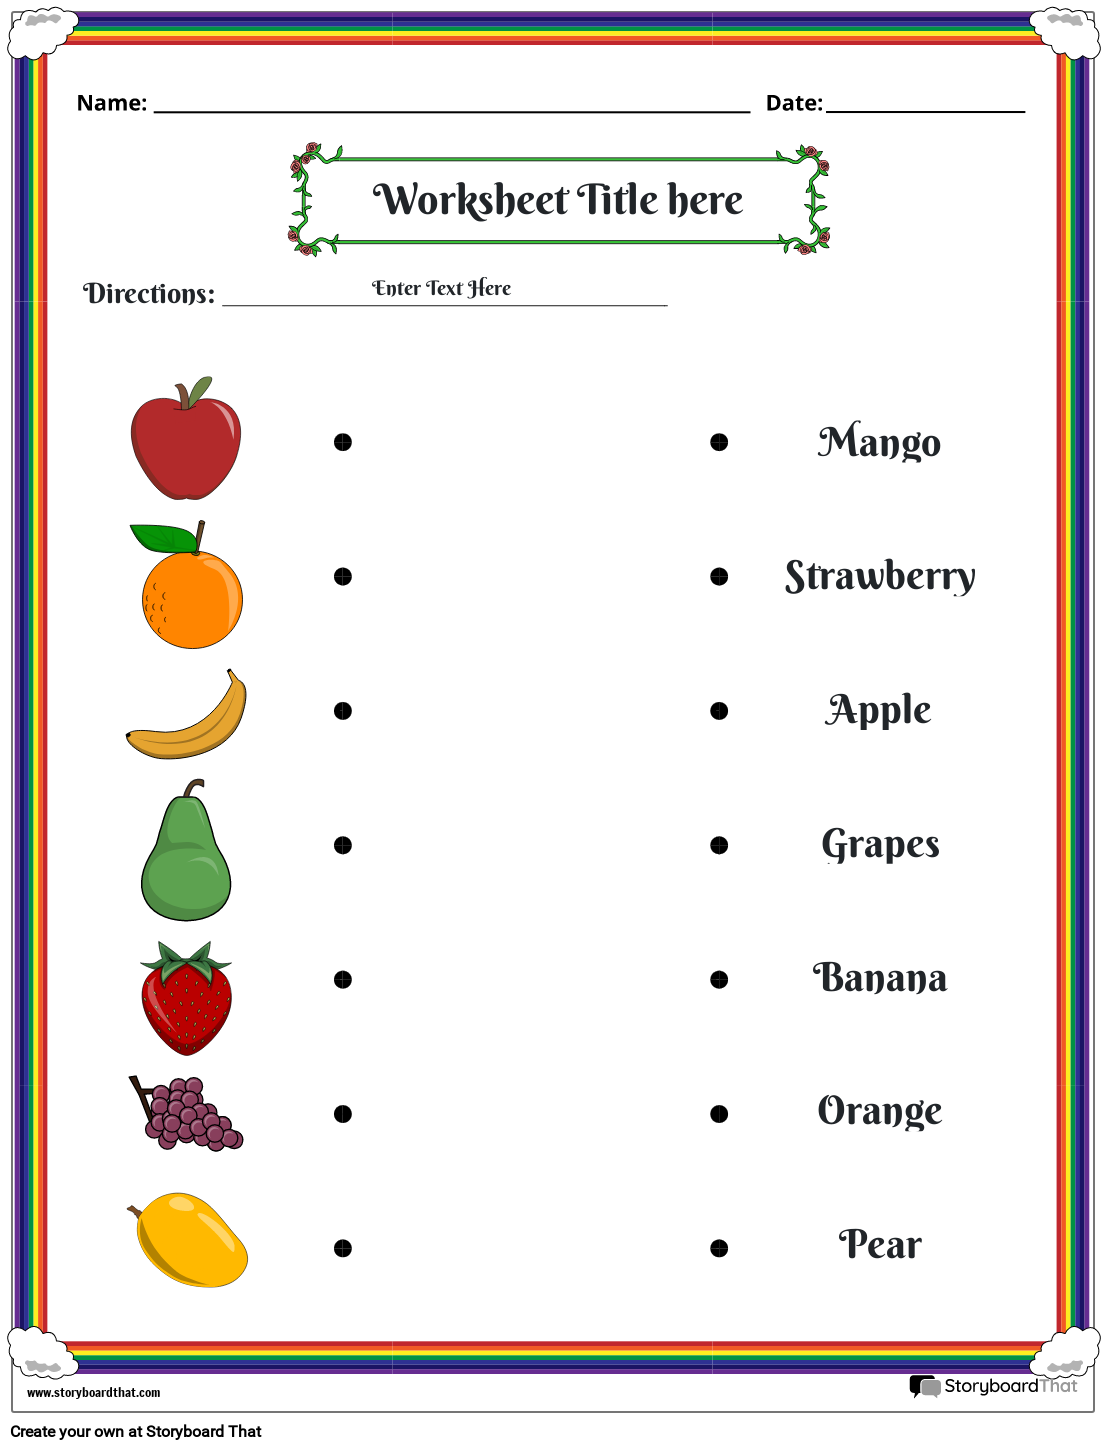 matching-fruits-with-names-color-worksheet-storyboard